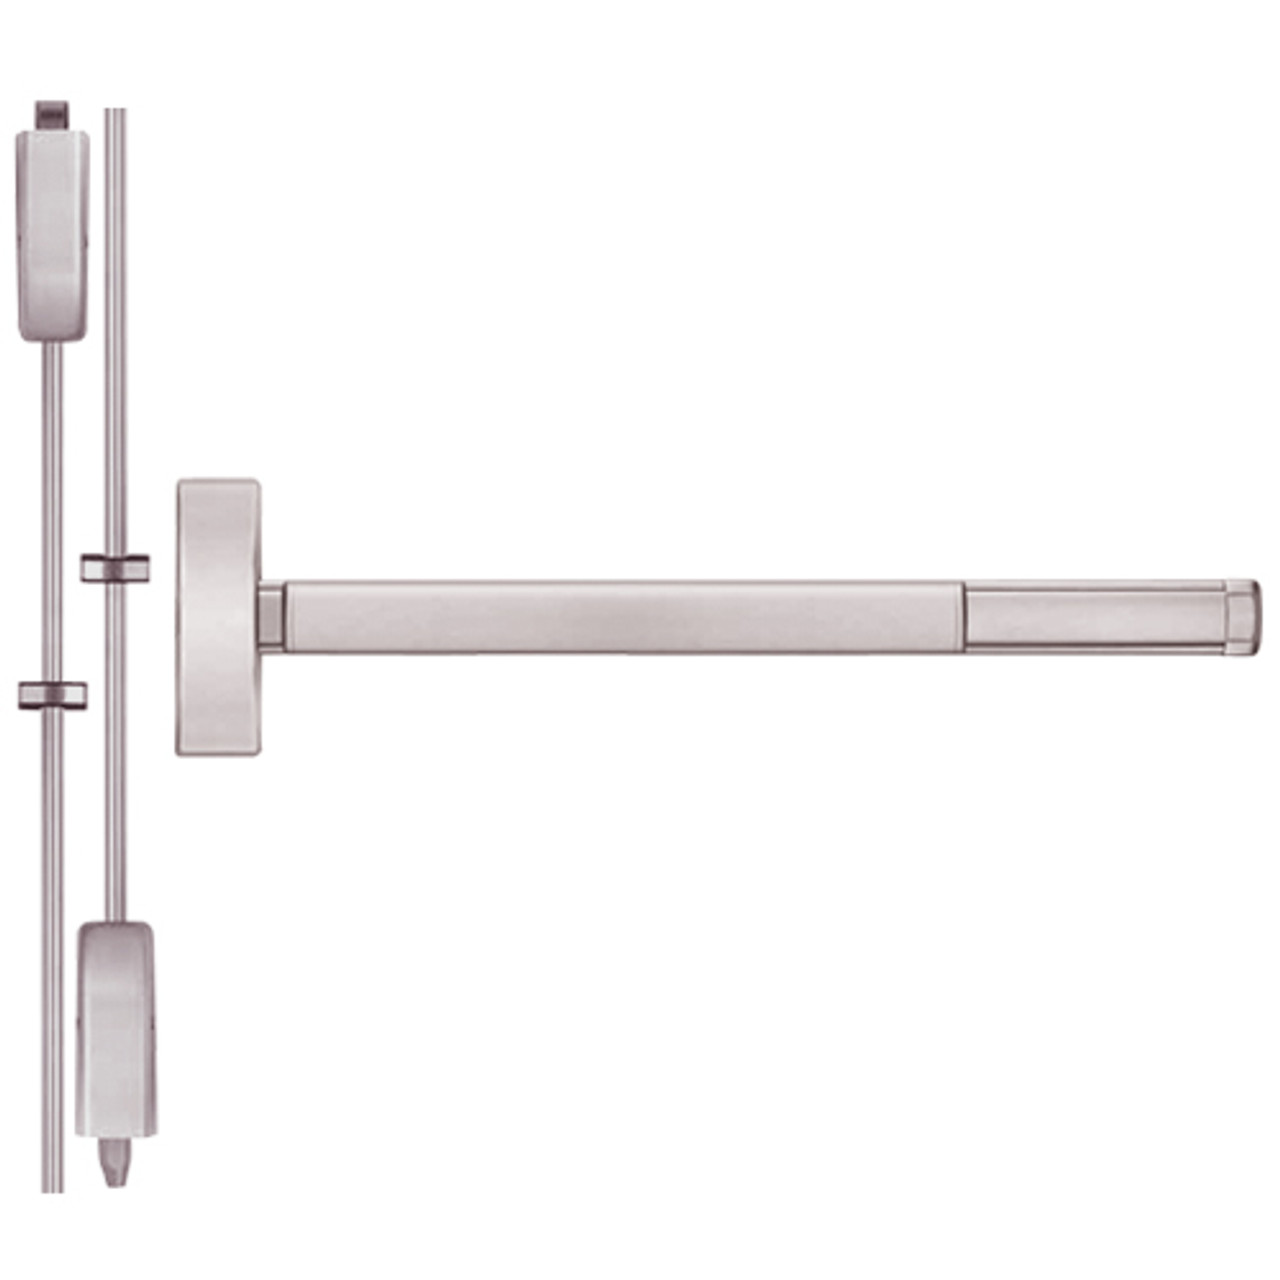 DE2205LBR-628-48 PHI 2200 Series Non Fire Rated Apex Surface Vertical Rod Device with Delayed Egress Prepped for Key Controls Thumb Piece in Satin Aluminum Finish